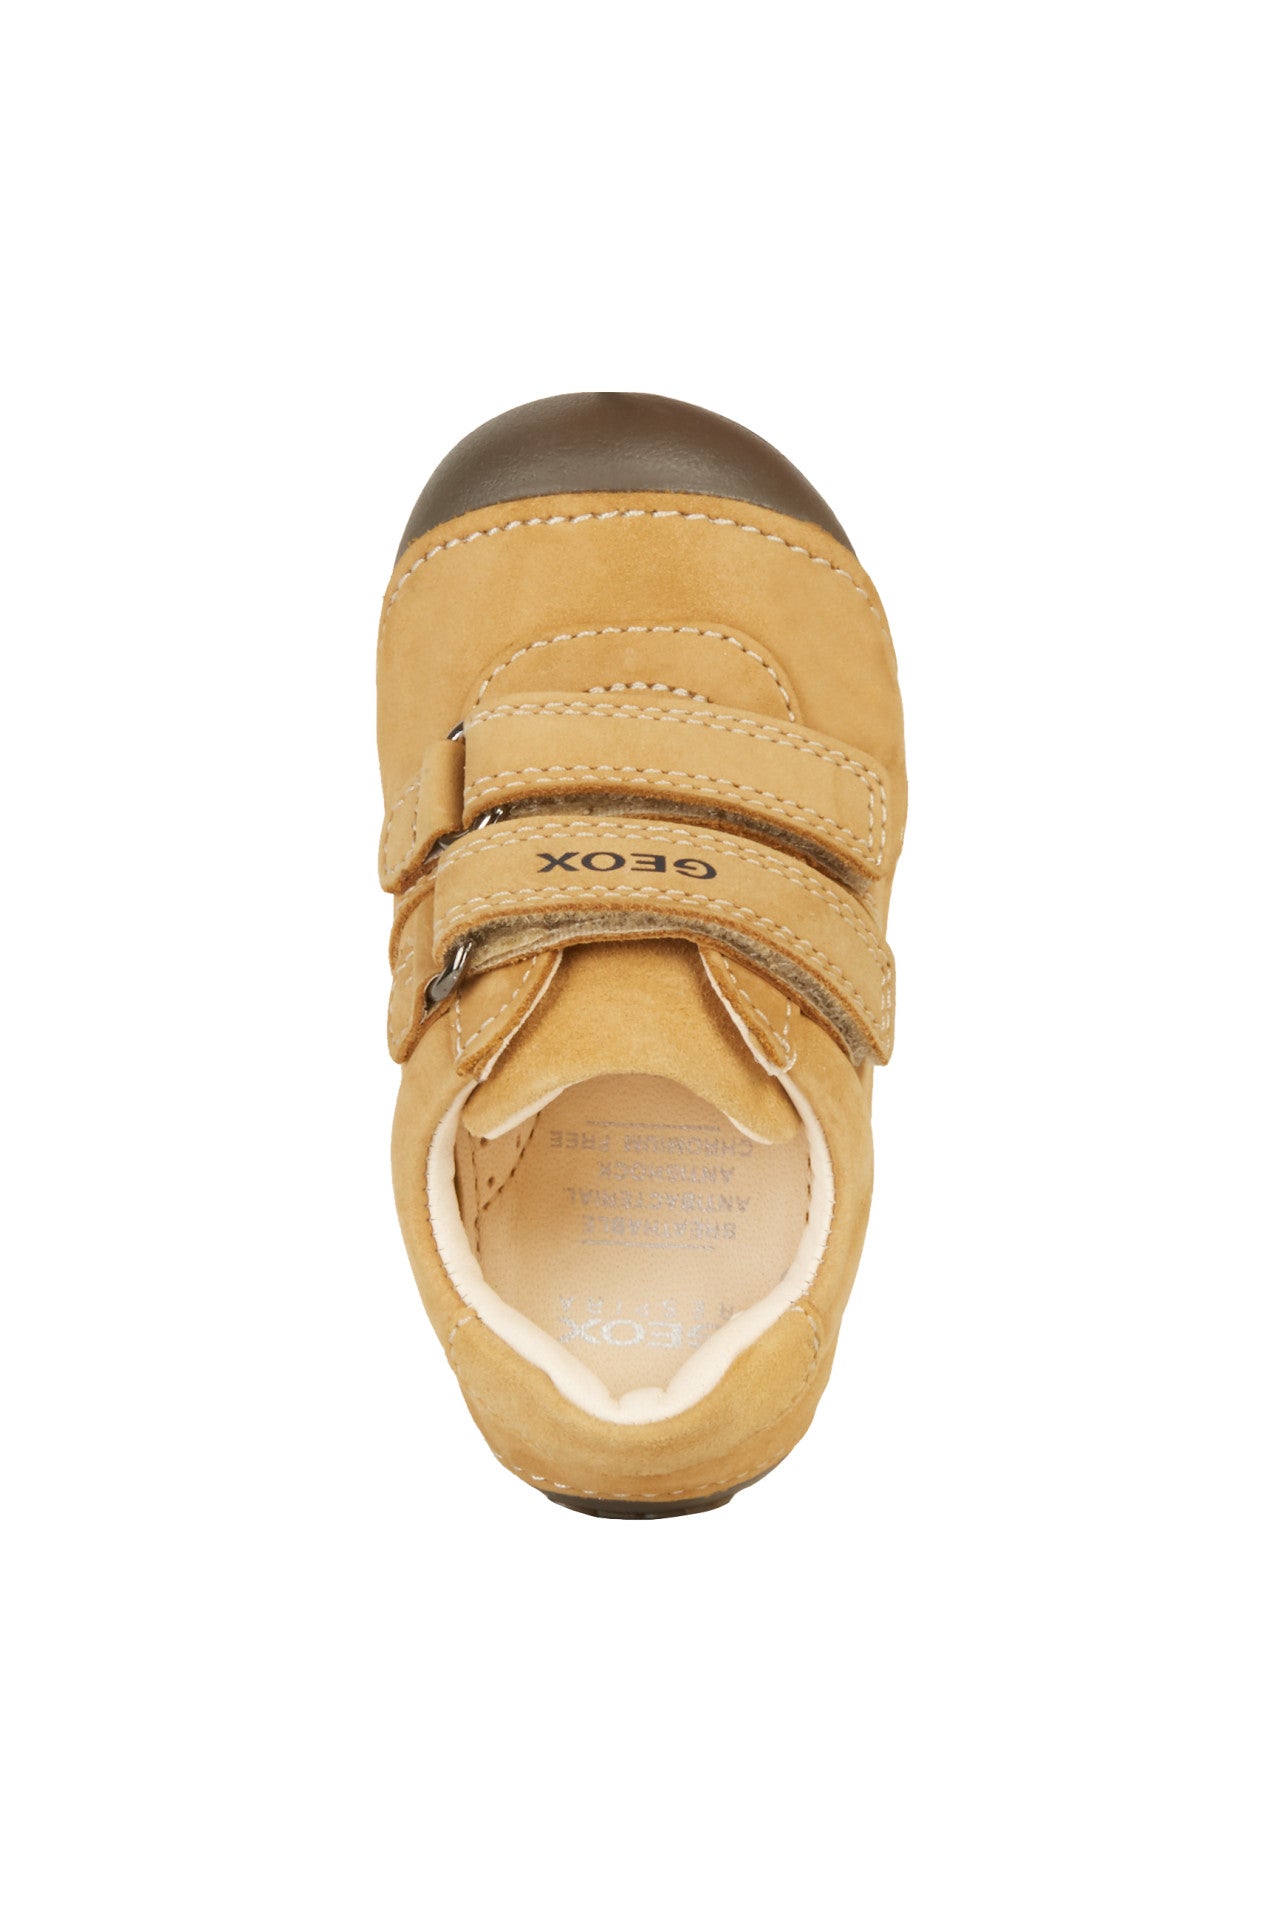 Boys pre walkers by Geox, style B Tutim, in light tan nubuck leather with double velcro fastening. View from above.